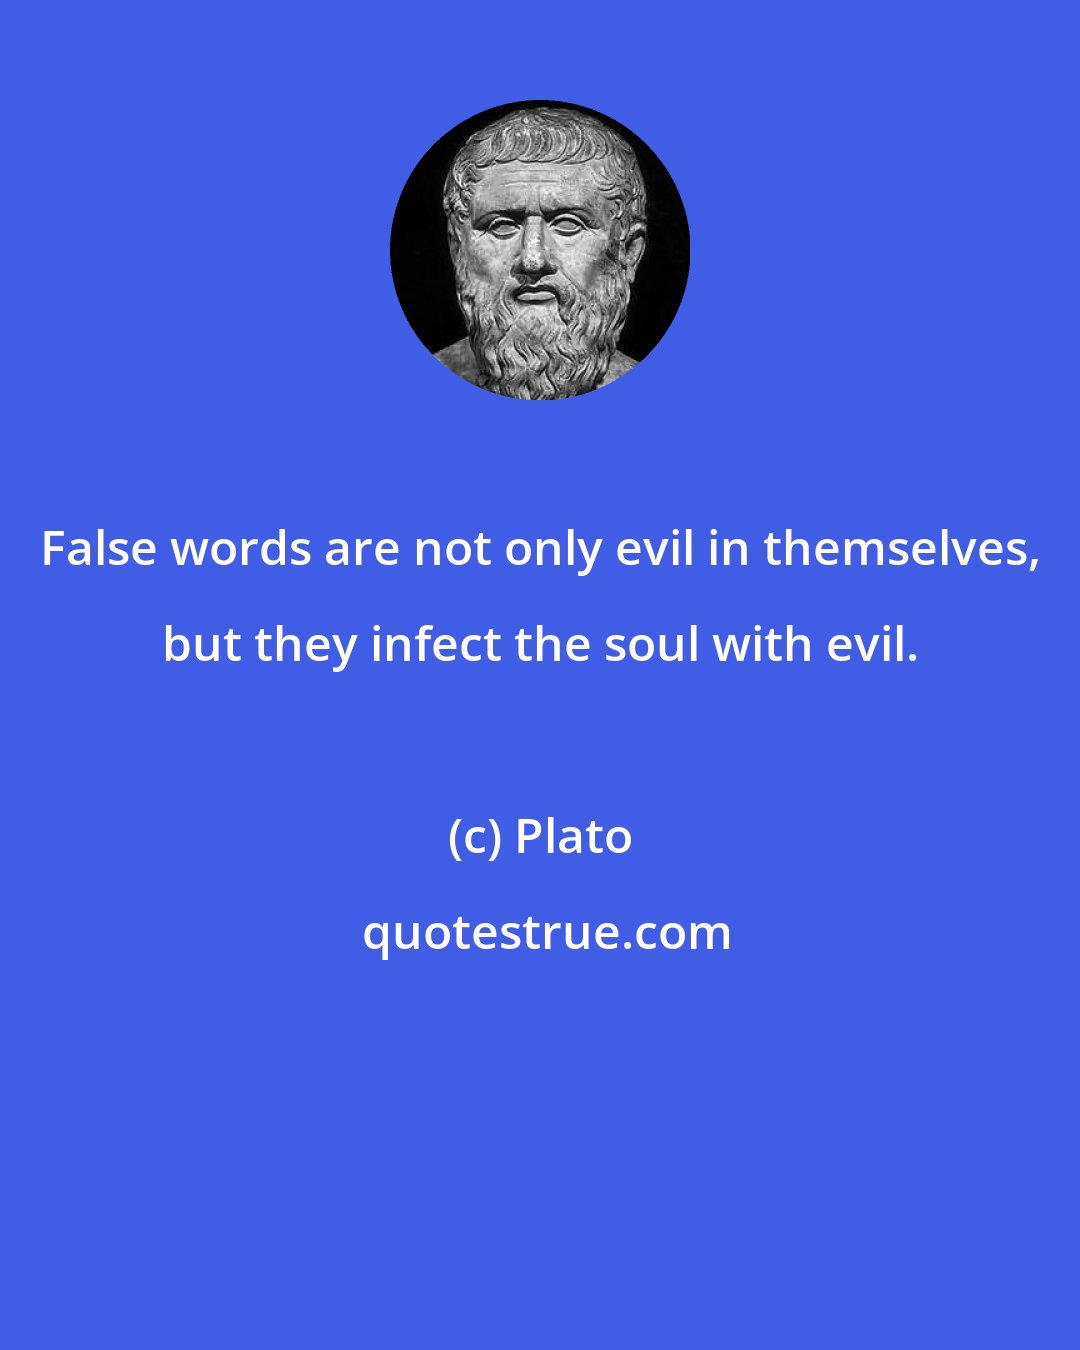 Plato: False words are not only evil in themselves, but they infect the soul with evil.